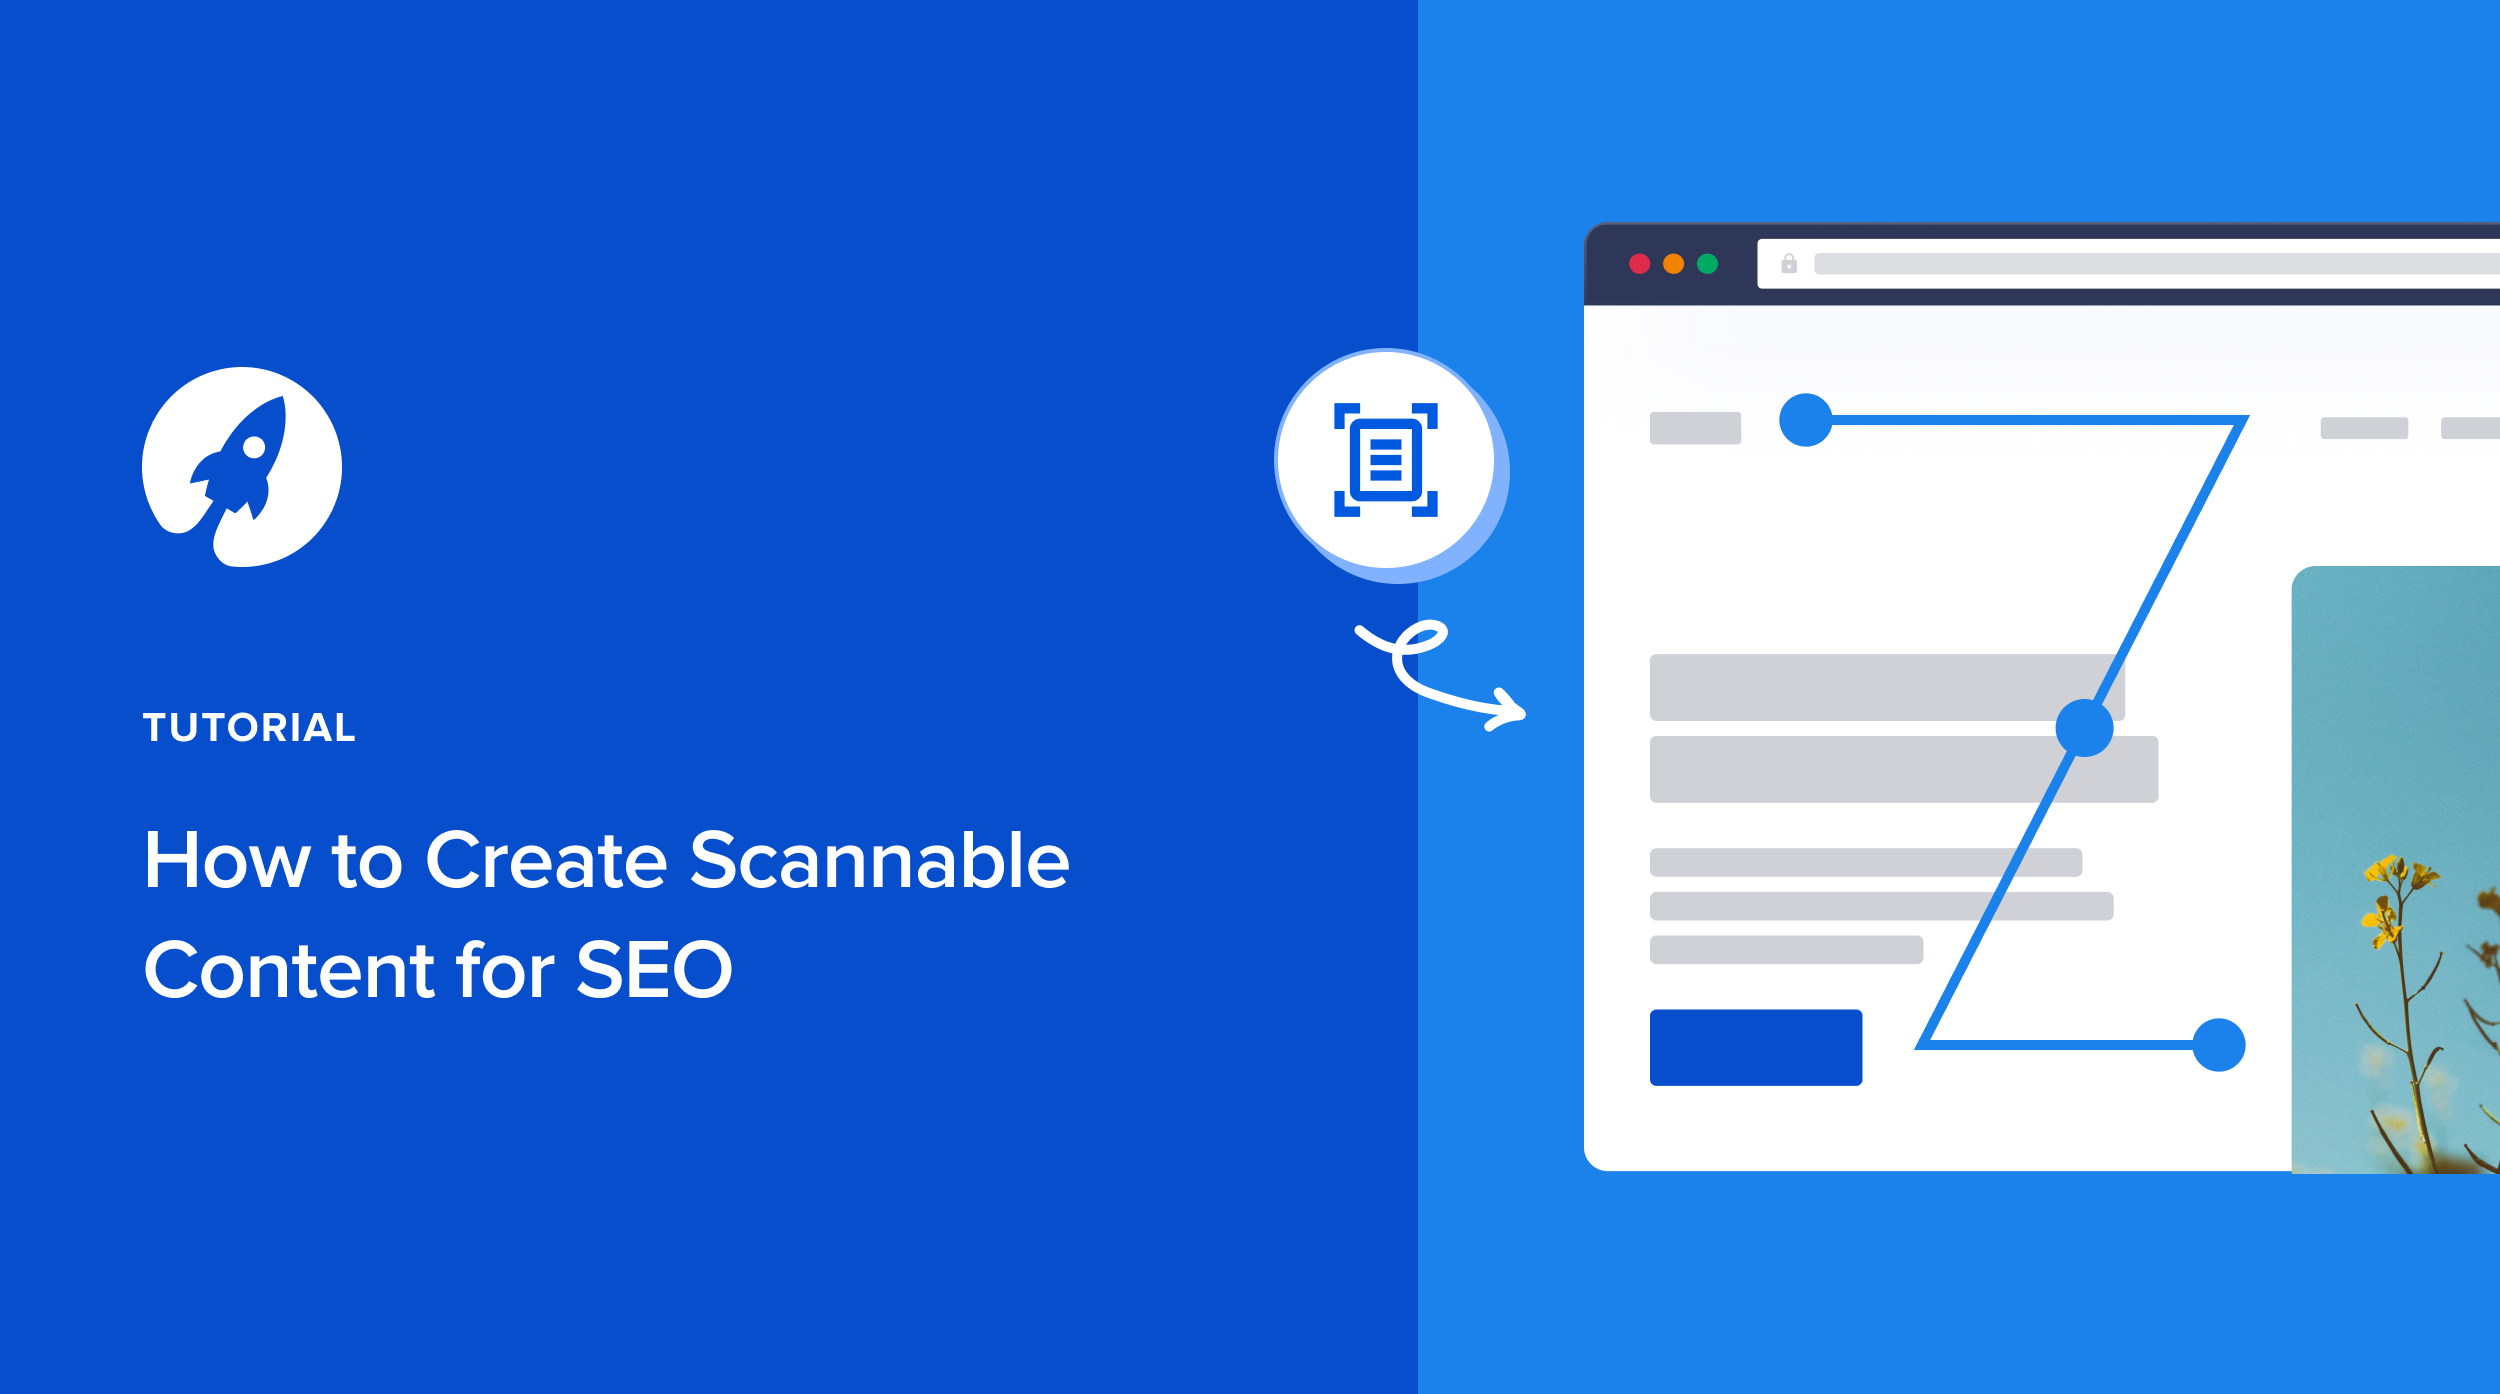 How to Create Scannable Content for SEO in 8 Steps